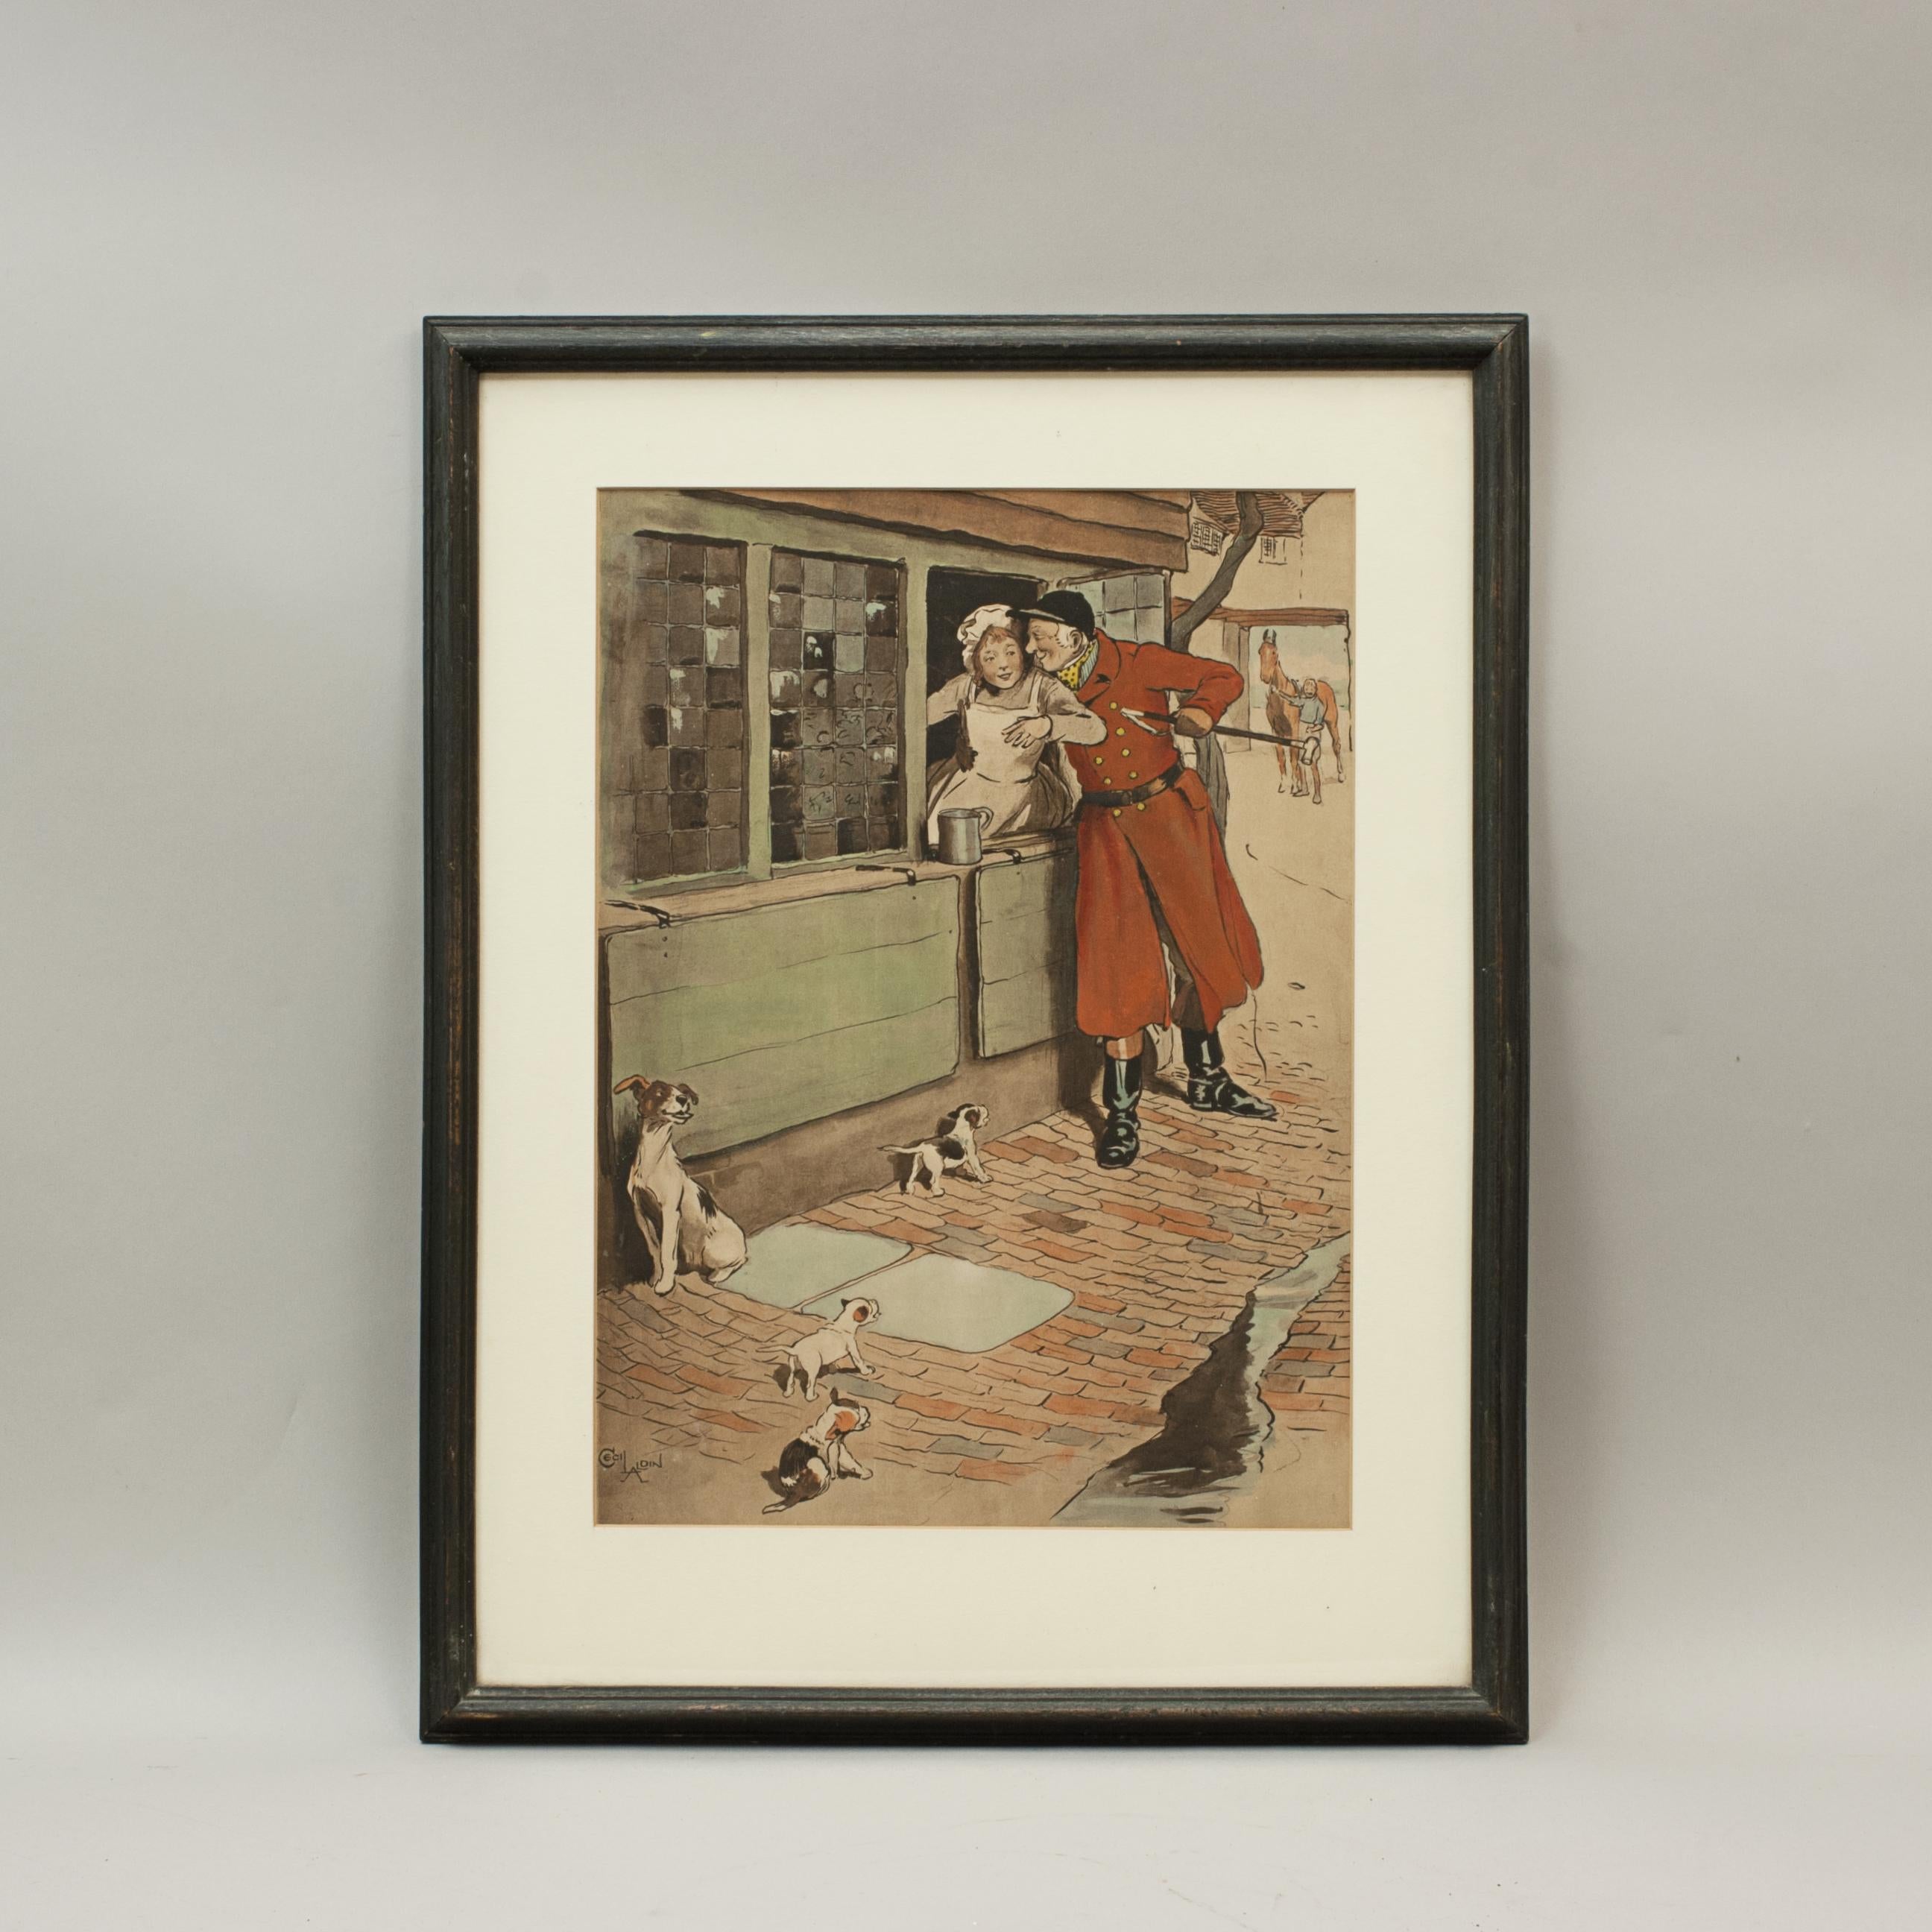 Vintage hunting print
An original fox hunting lithograph print 'The Amorous Huntsman' depicting a huntsman flirting with a serving girl through a window. A very rare hand colored lithograph by Cecil Aldin, circa 1905. As with a lot of Aldin's